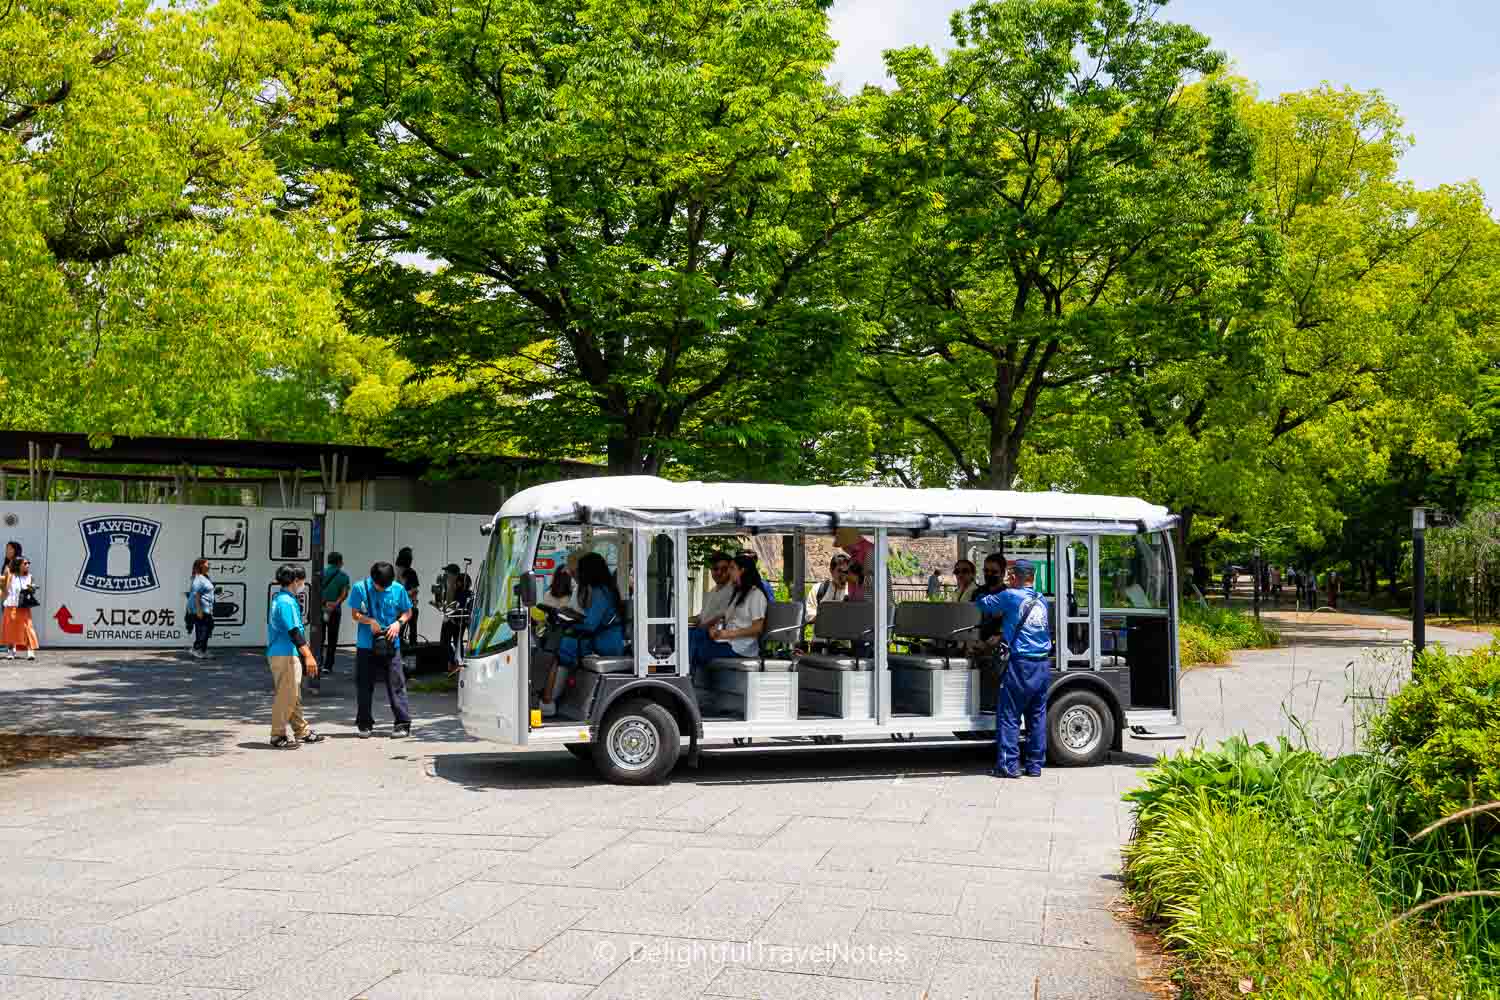 The mini shuttle around Osaka Castle grounds parking in front of a Lawson convenience store.